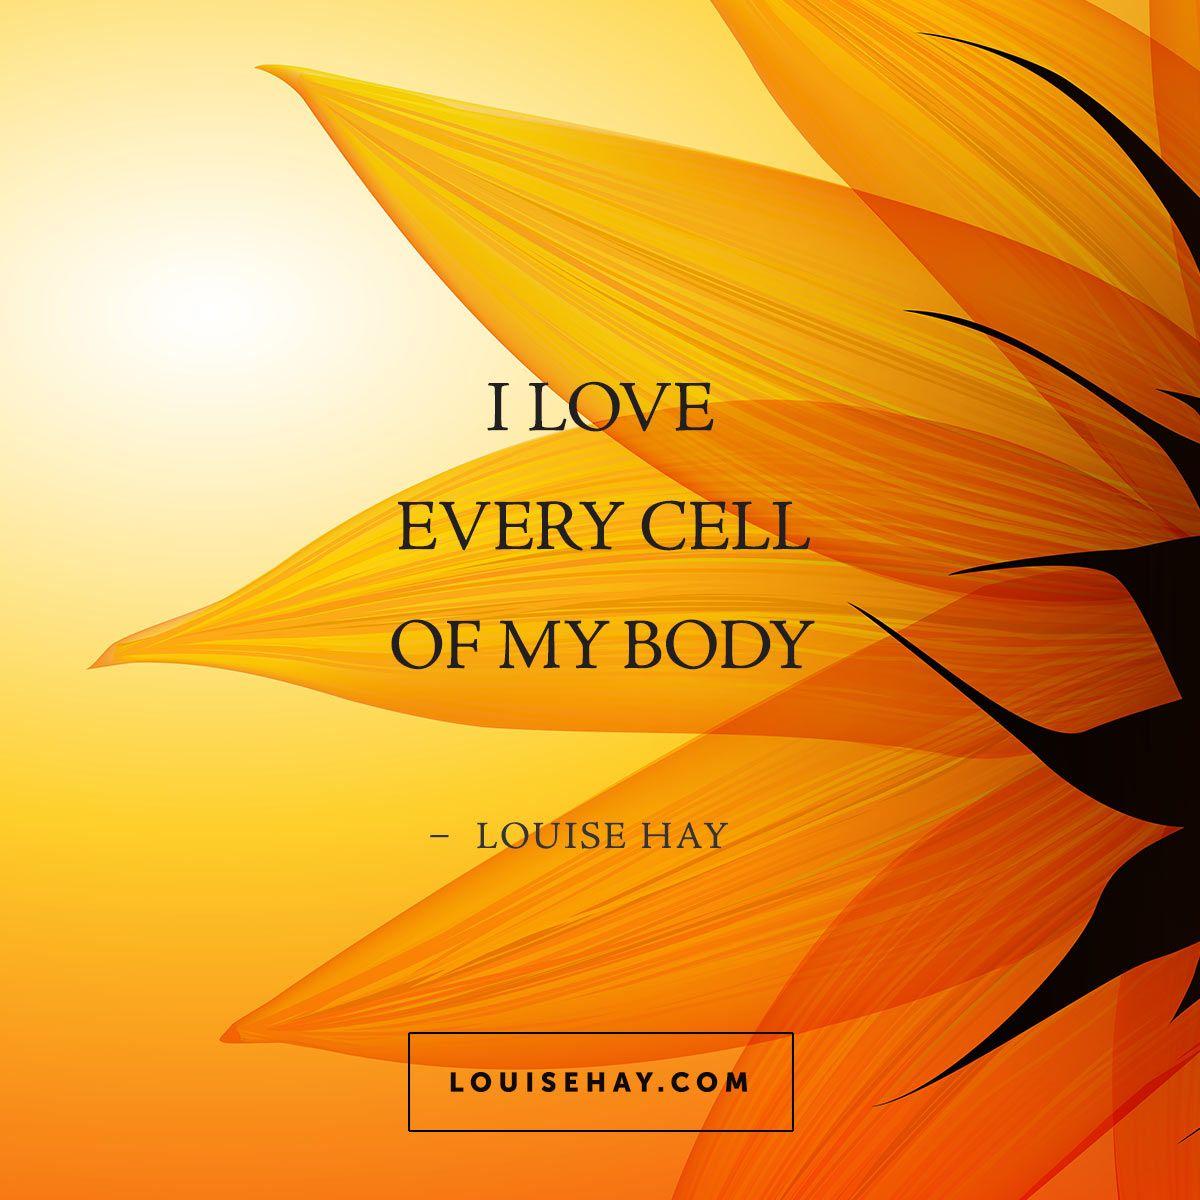 Daily Affirmations by. Louise hay affirmations, Louise hay